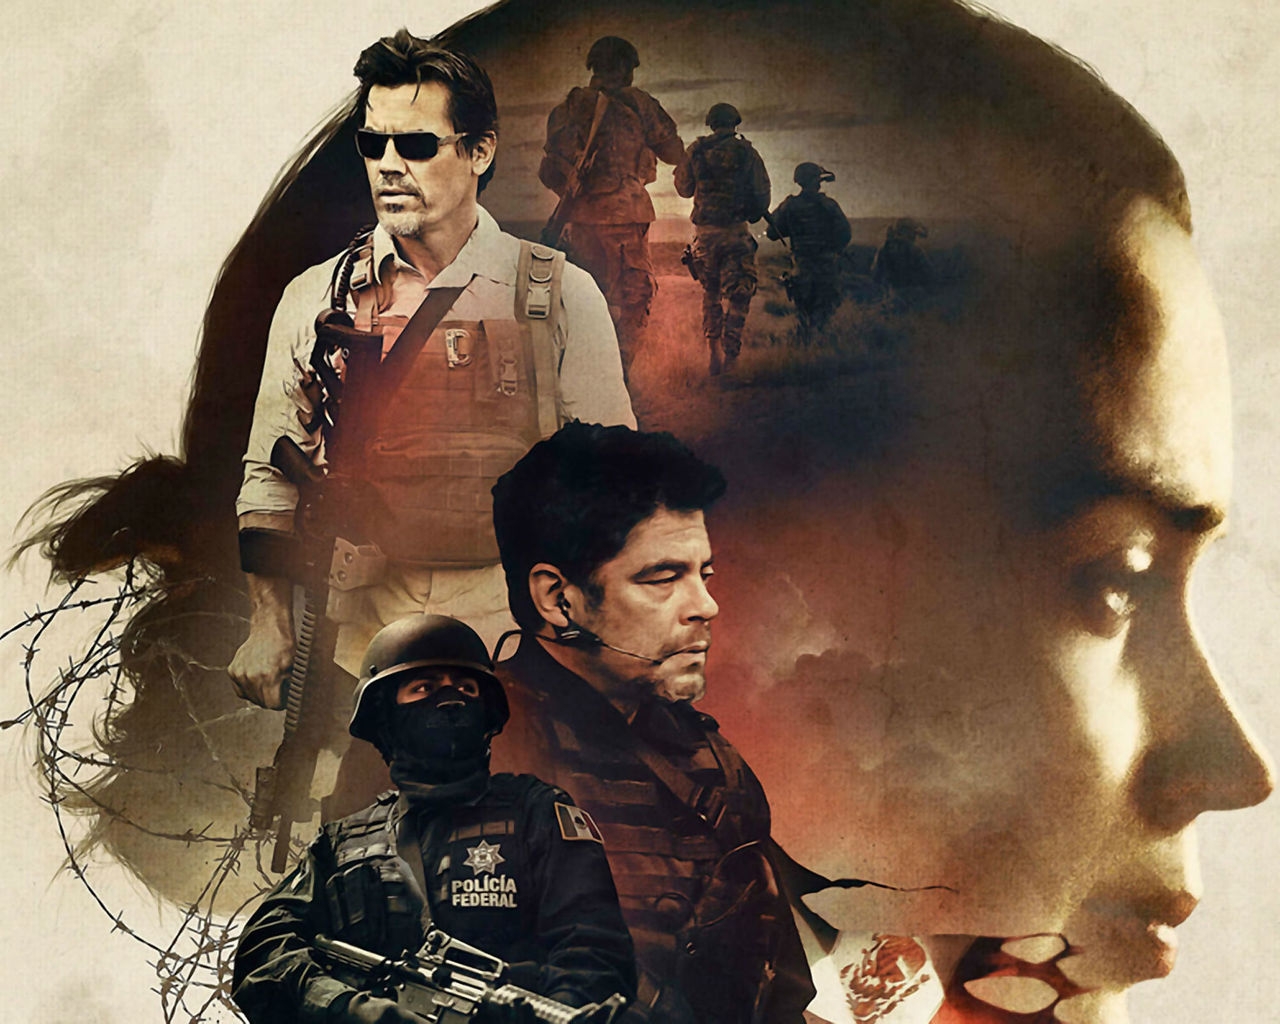 Sicario Movie Poster for 1280 x 1024 resolution